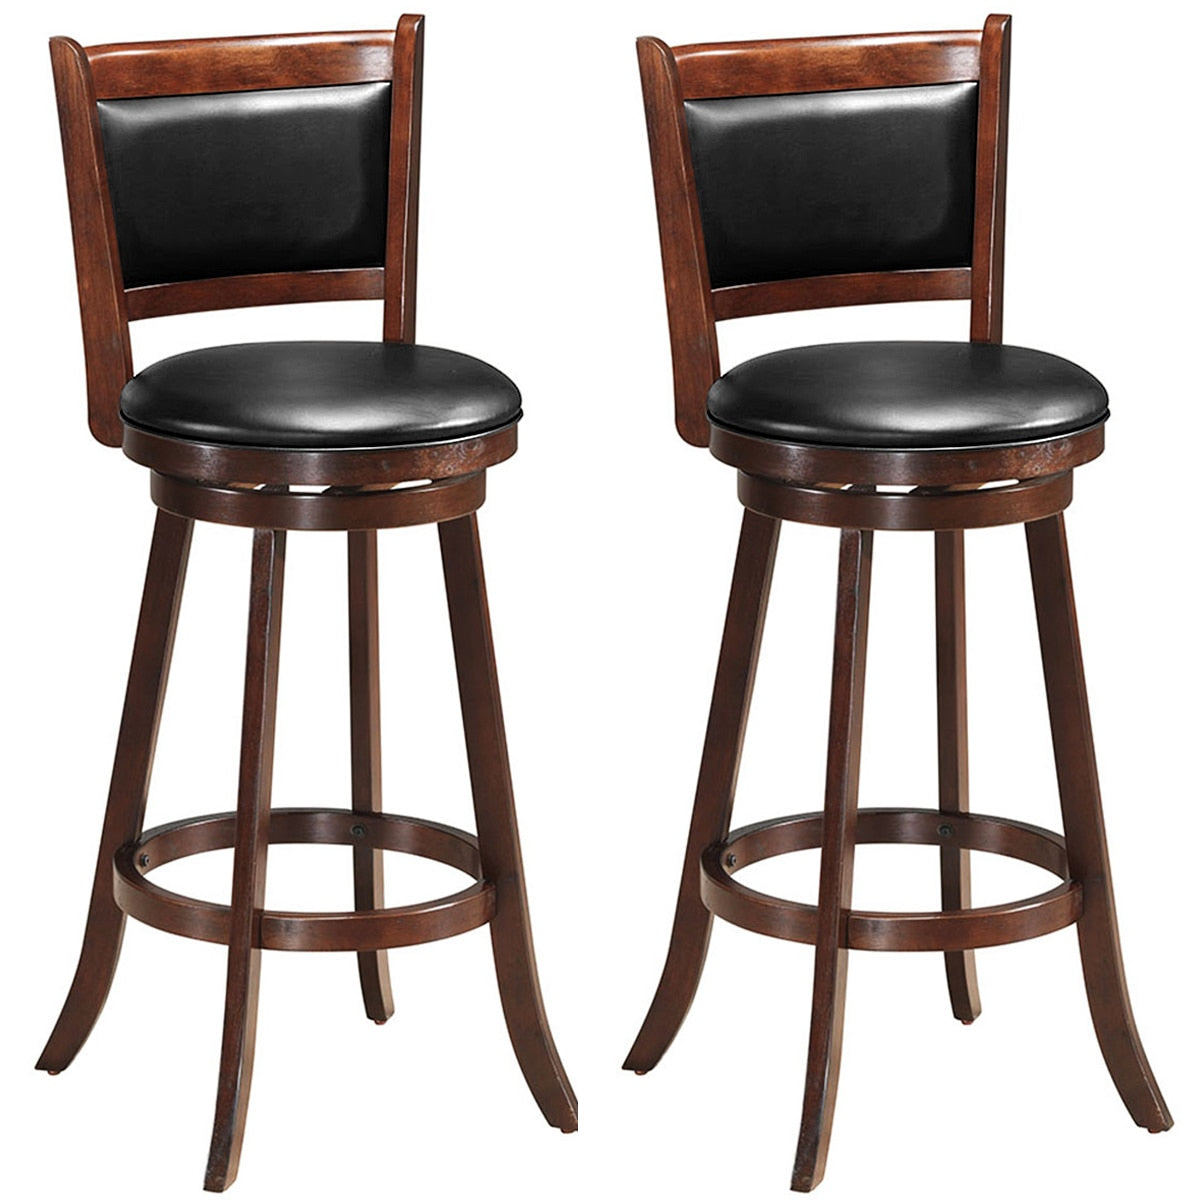 Swivel Bar Height Stool Wood Dining Chair Upholstered Seat Espresso Set of 2 -